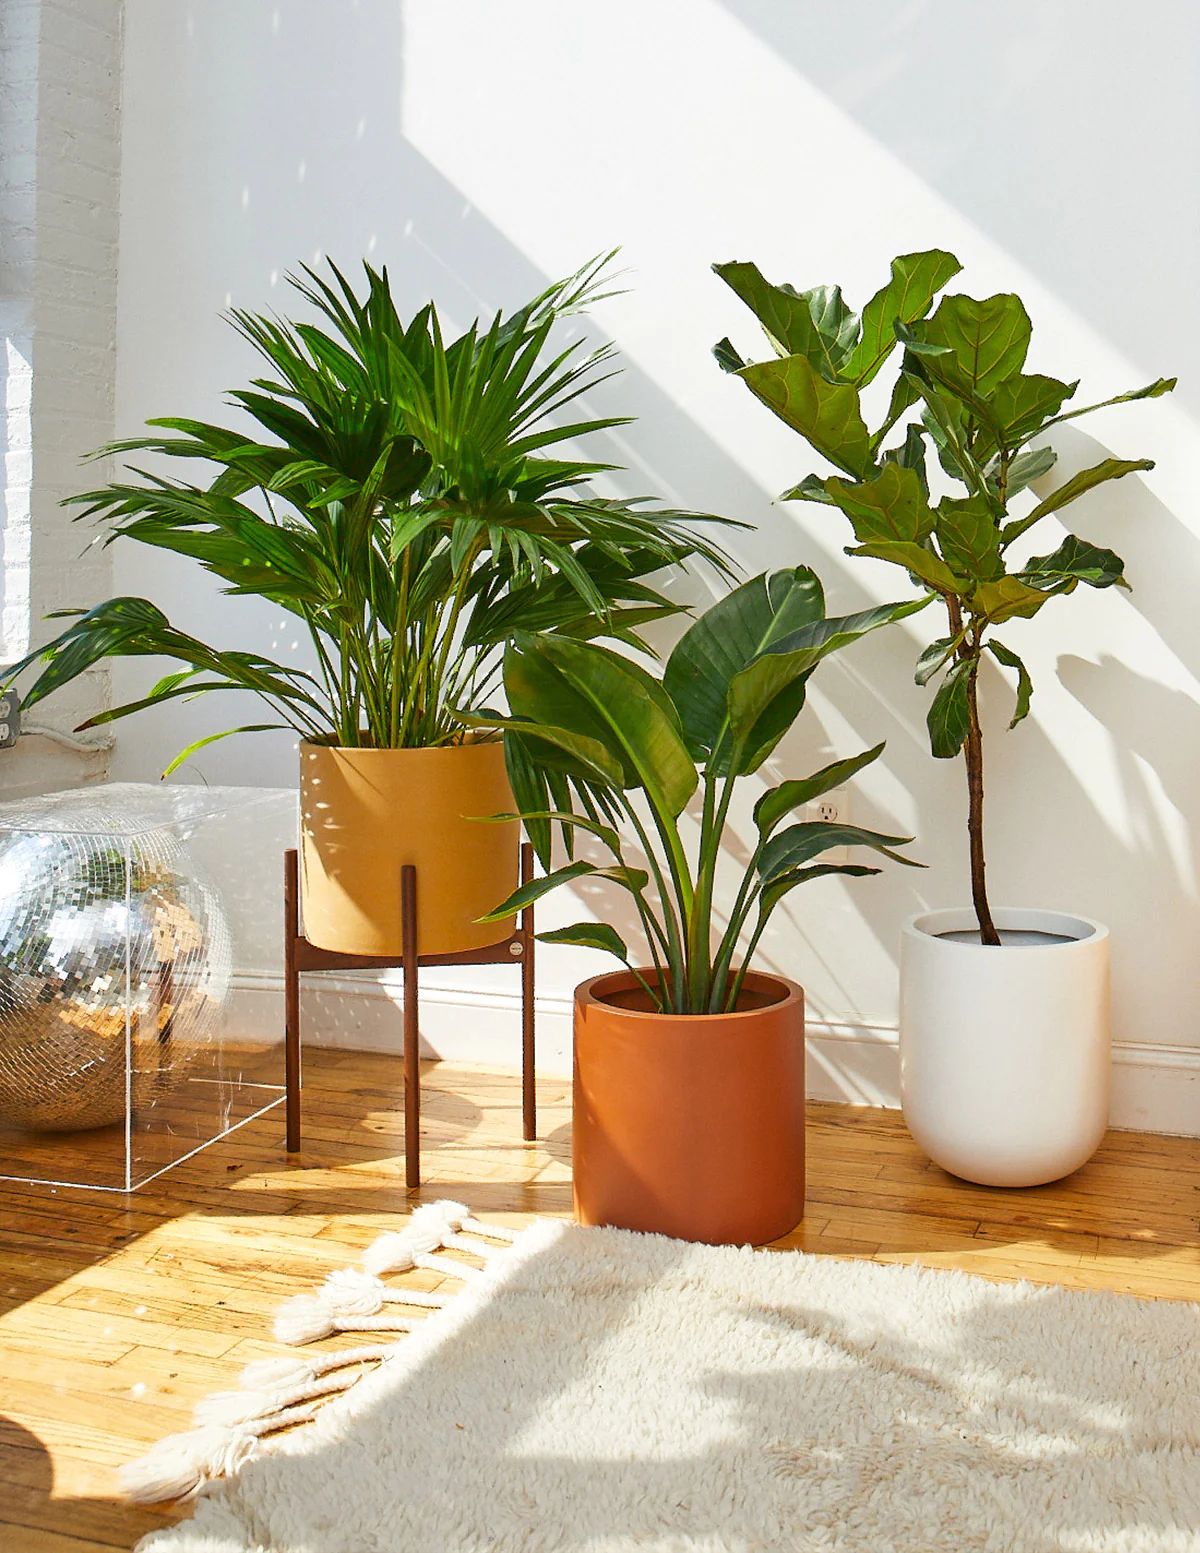 Large Fiddle Leaf Fig Tree | The Sill